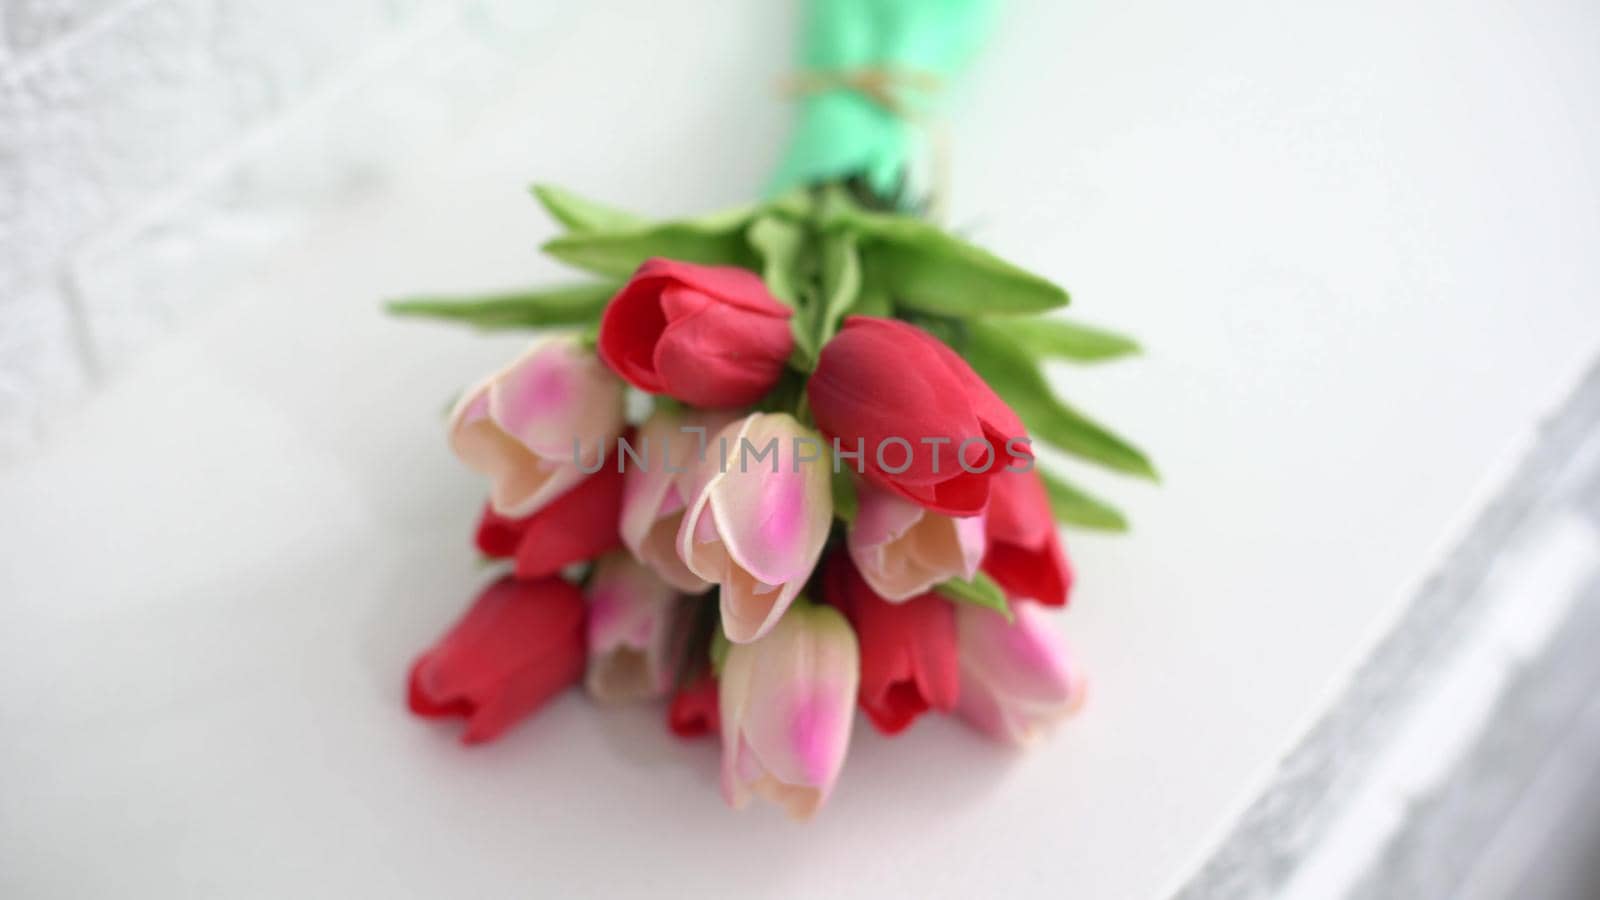 bunch of tulips isolated on white background by Andelov13